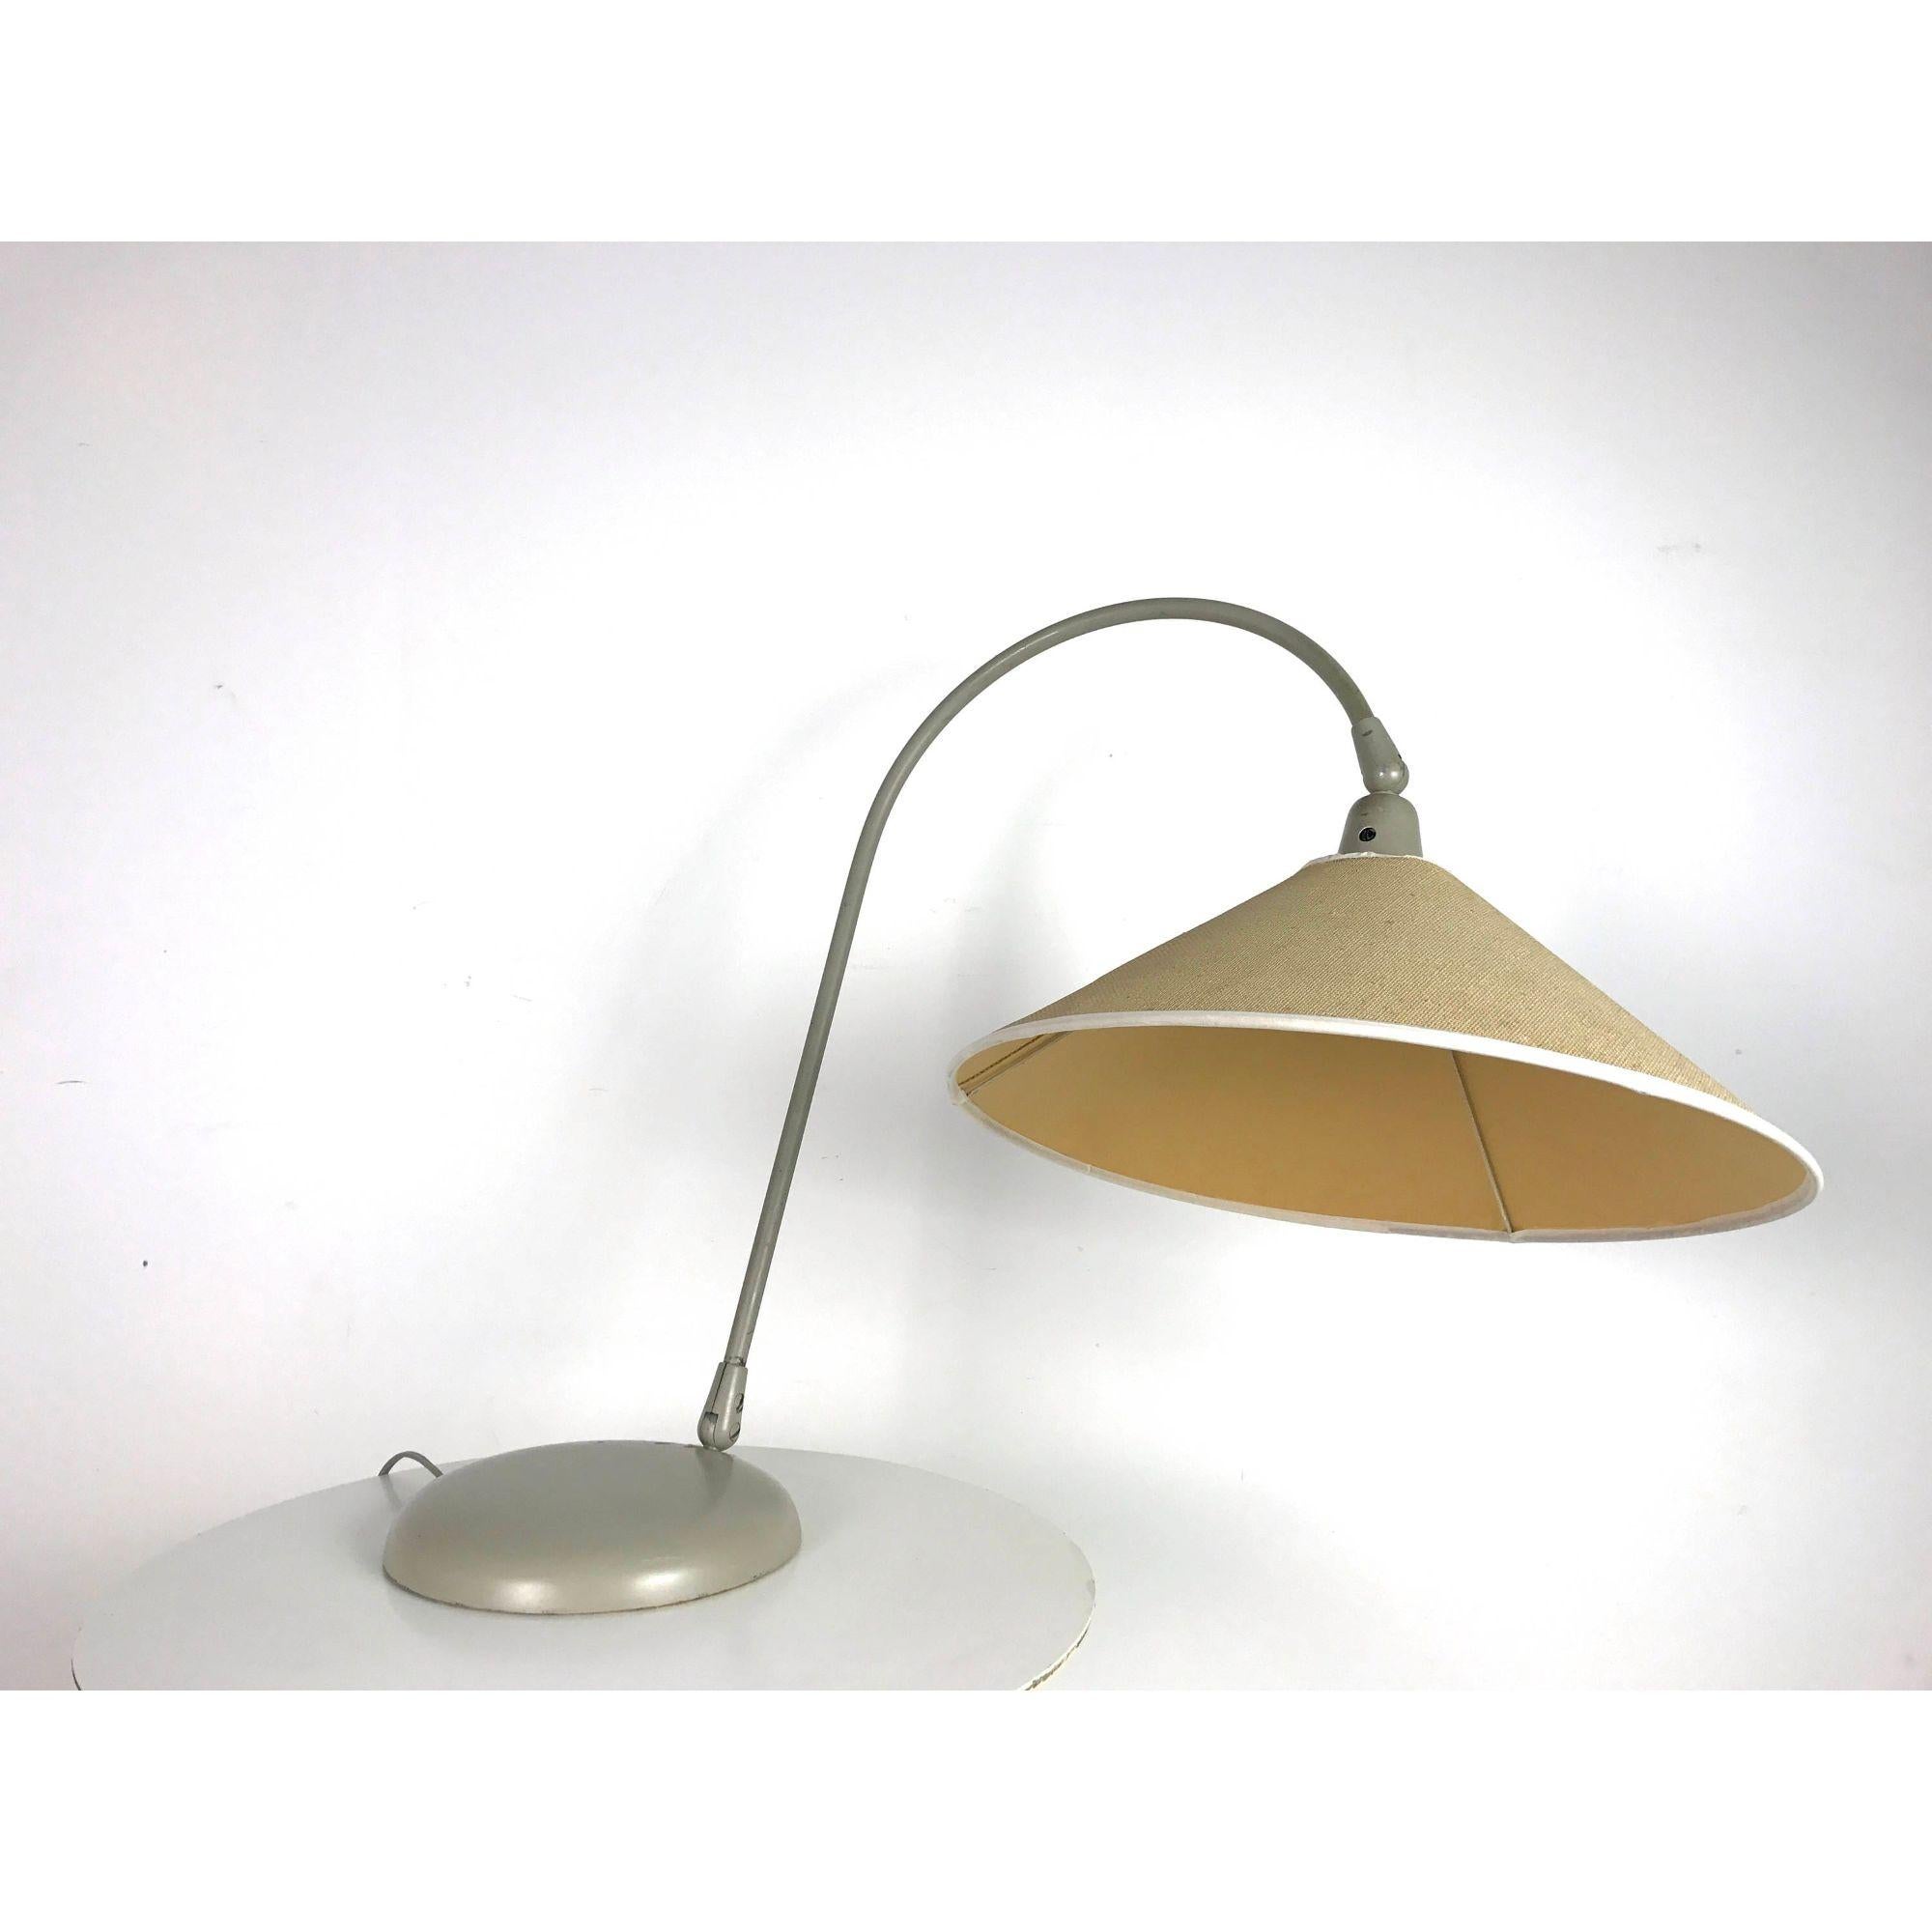 Enameled Rare Articulated Table Lamp in Metal by Kurt Versen, Early 1950's For Sale